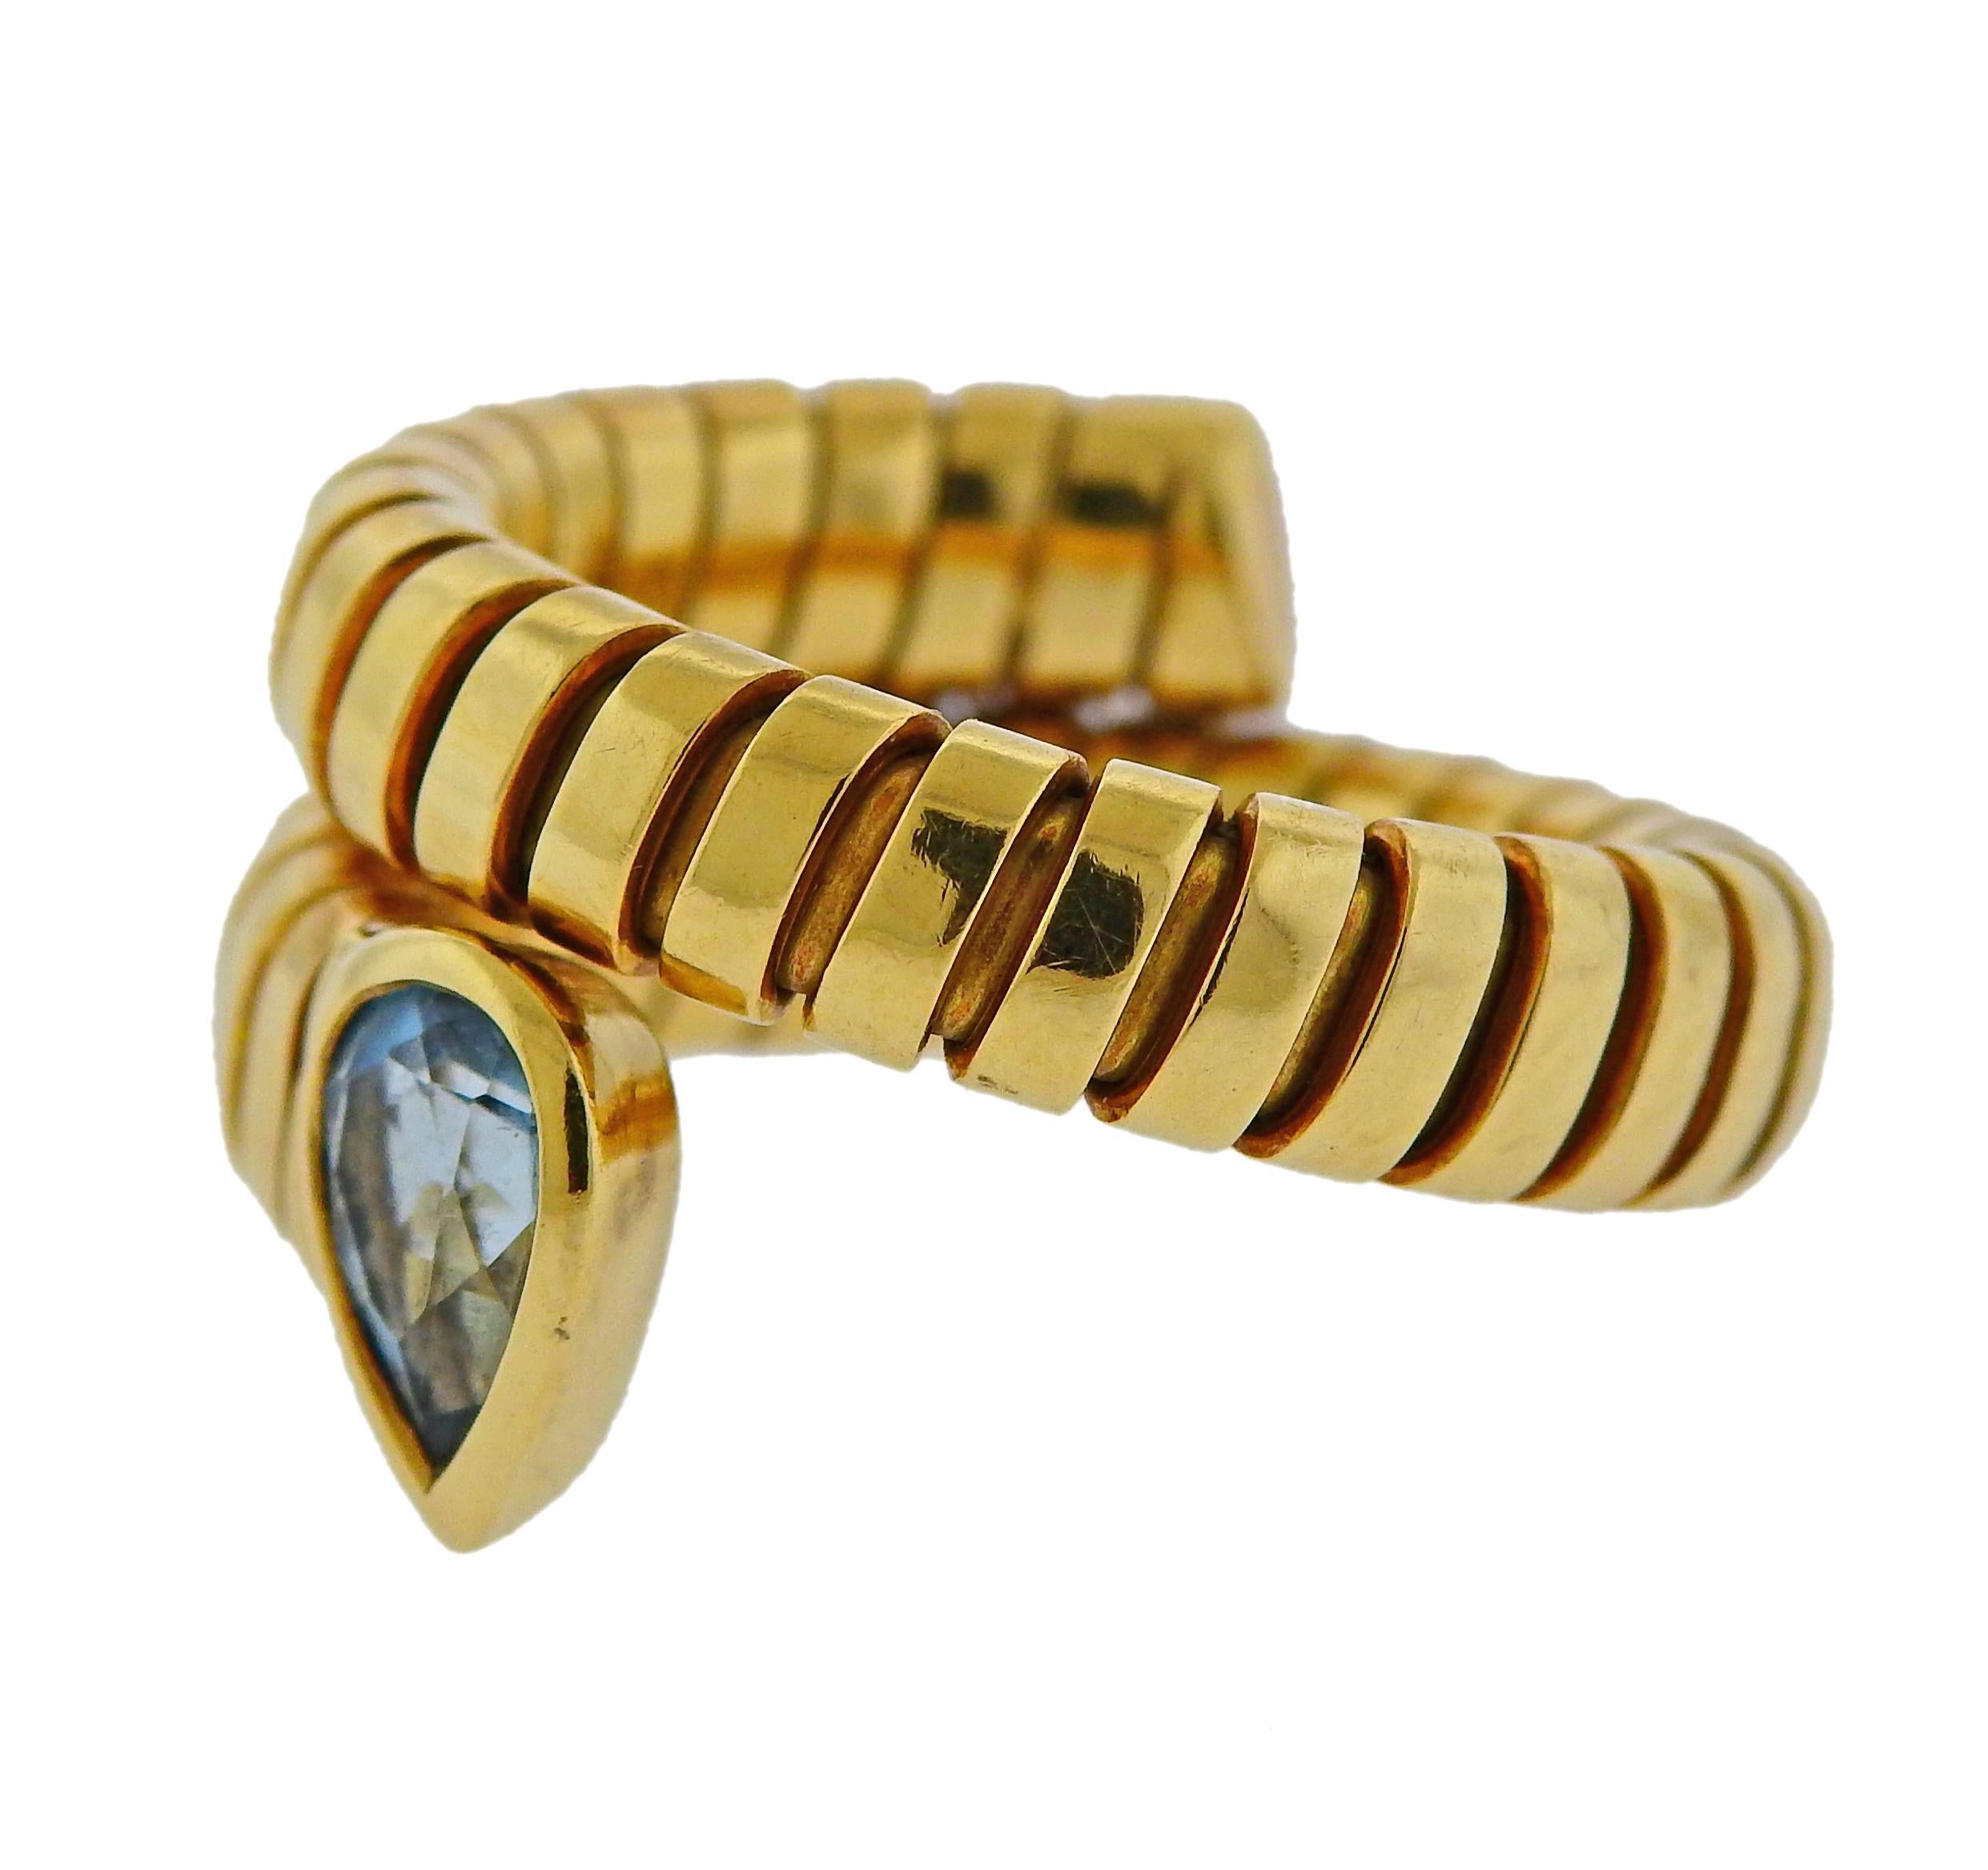 Bvlgari 18k yellow gold wrap ring from Tubogas collection, set with blue topaz gemstone. Ring size - 6-6.5 (slightly flexible) , ring is 14mm wide. Weight is 11.4 grams, Marked Bvlgari, Italian mark, 750.
